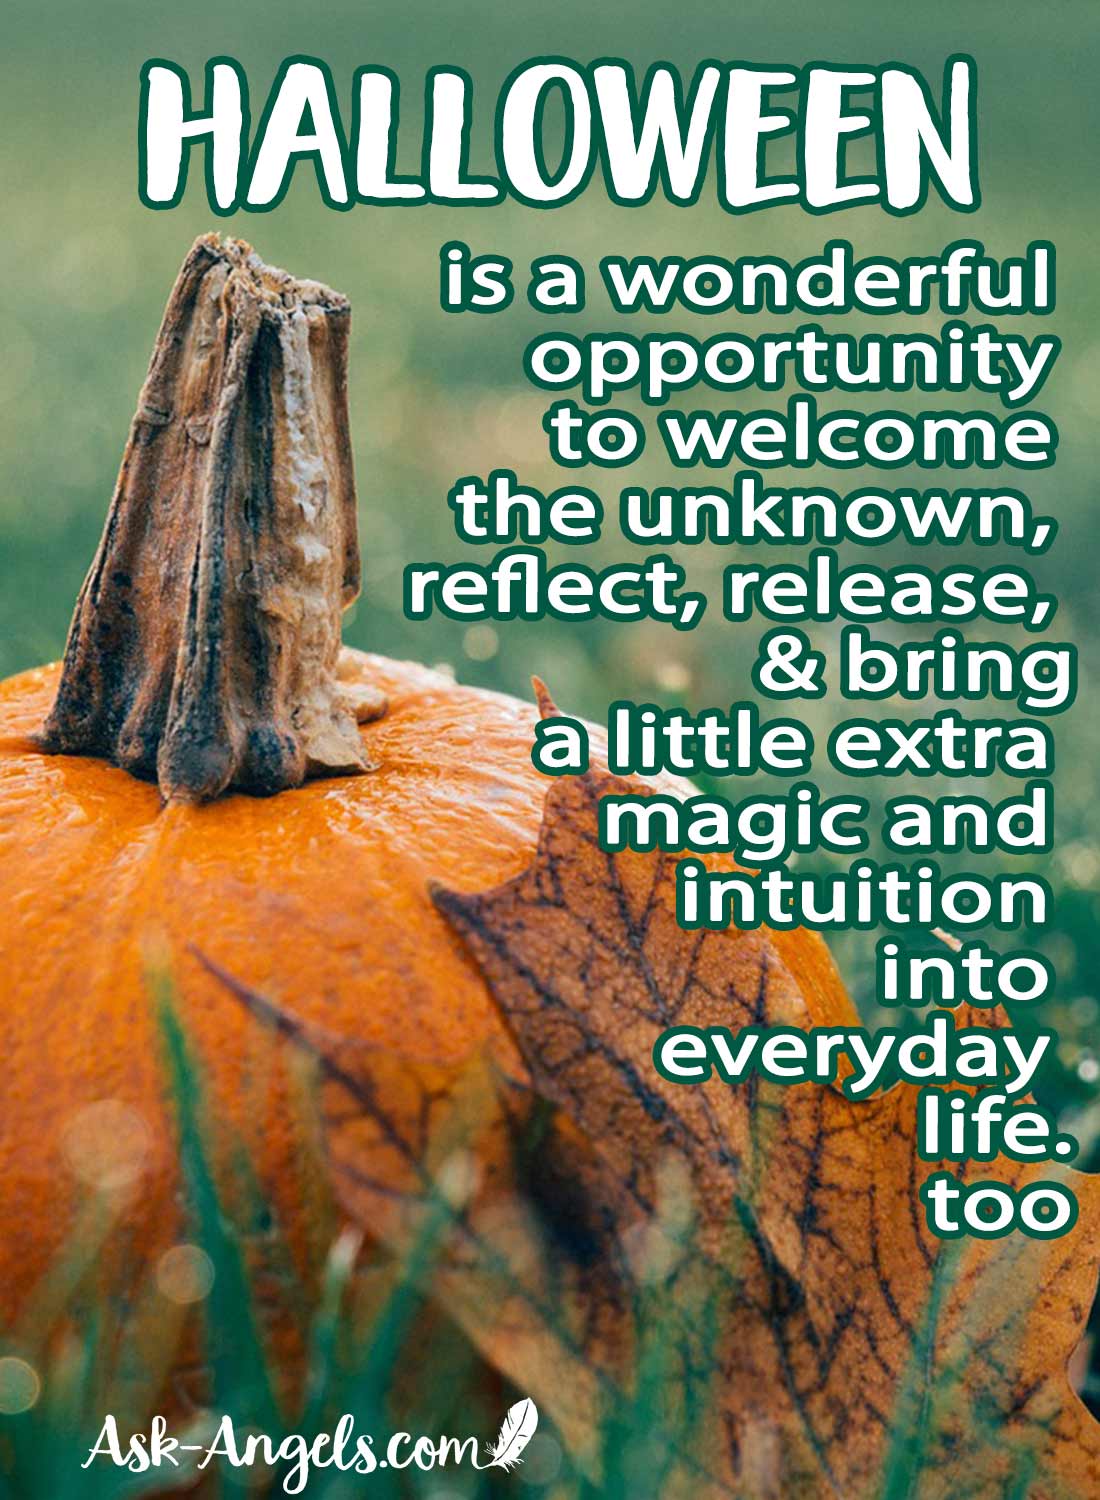 Halloween as a great opportunity to welcome the unknown, reflect, release, and bring a little extra magic and intuition into everyday life.